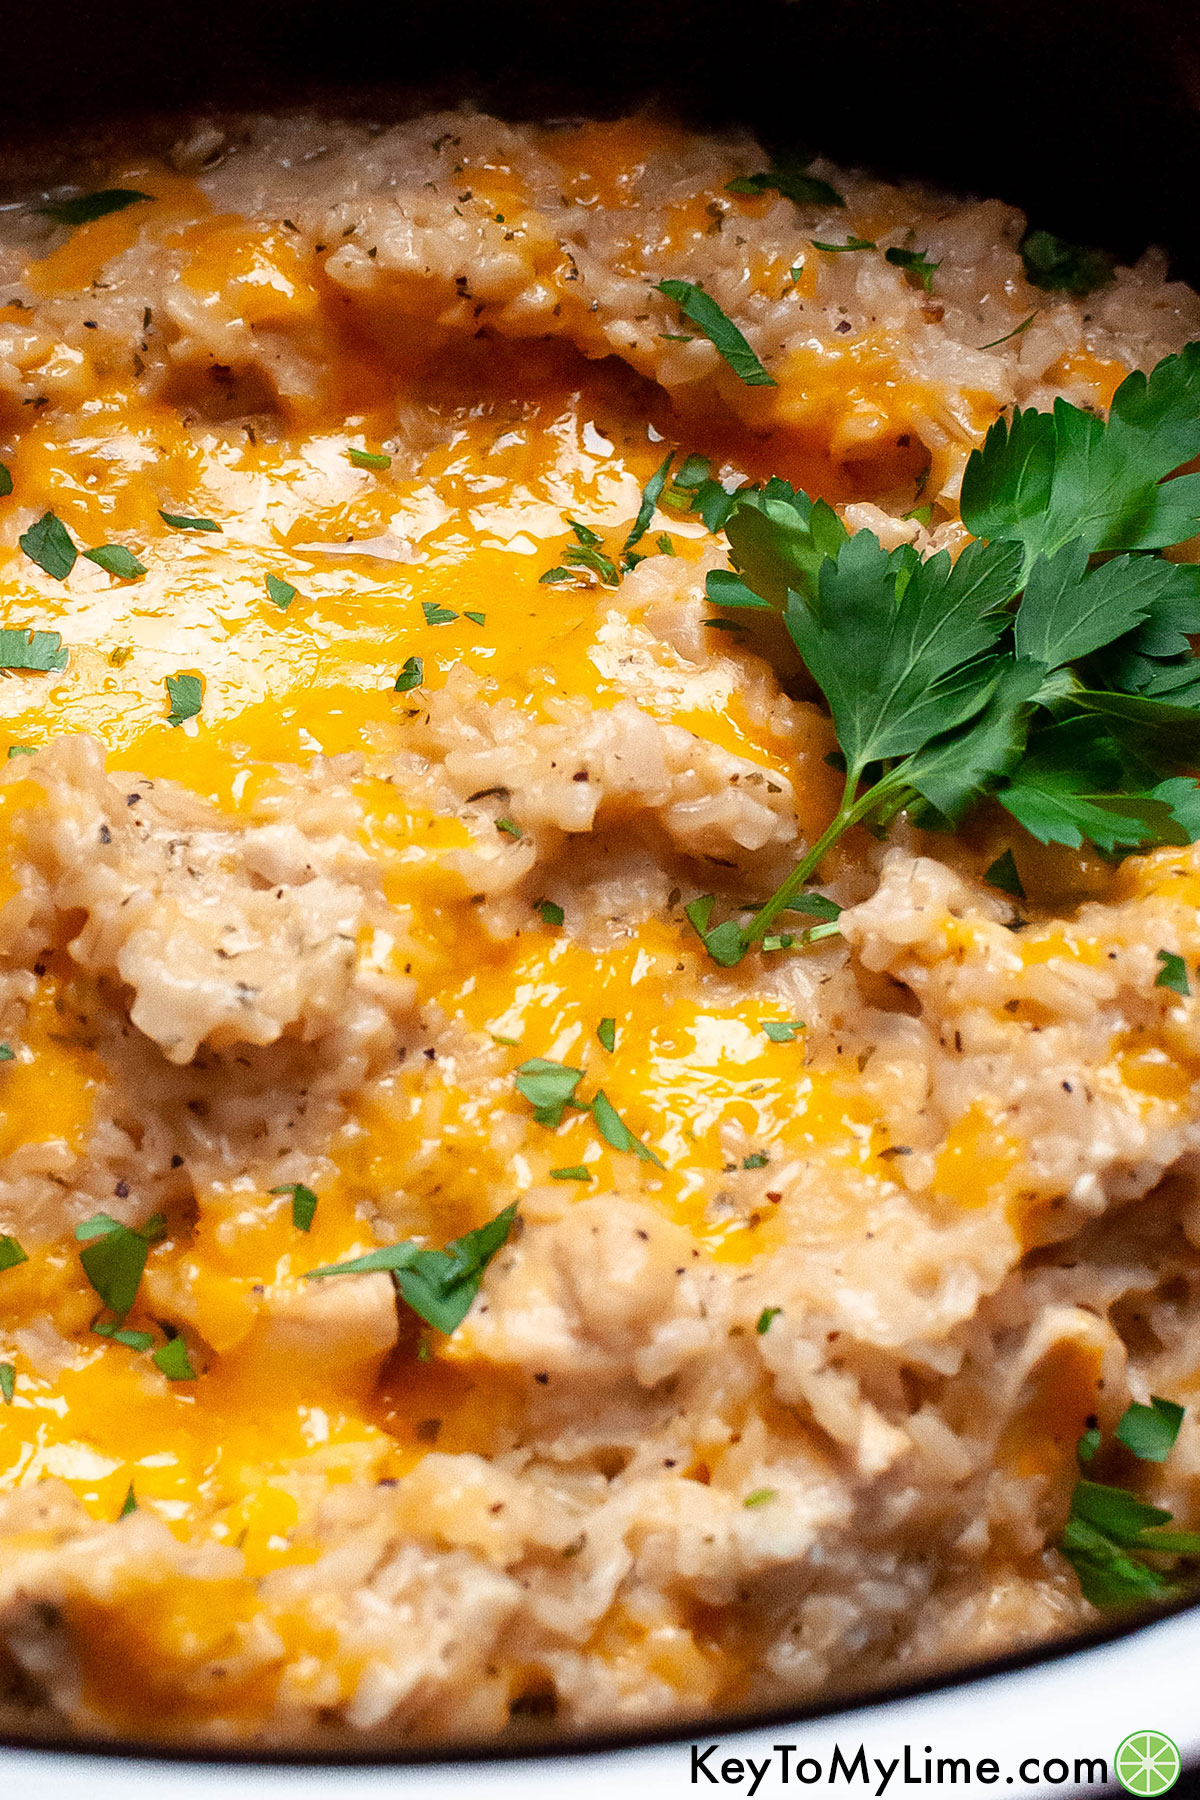 A close up showing the texture of the cheese chicken and rice dish in a crockpot.